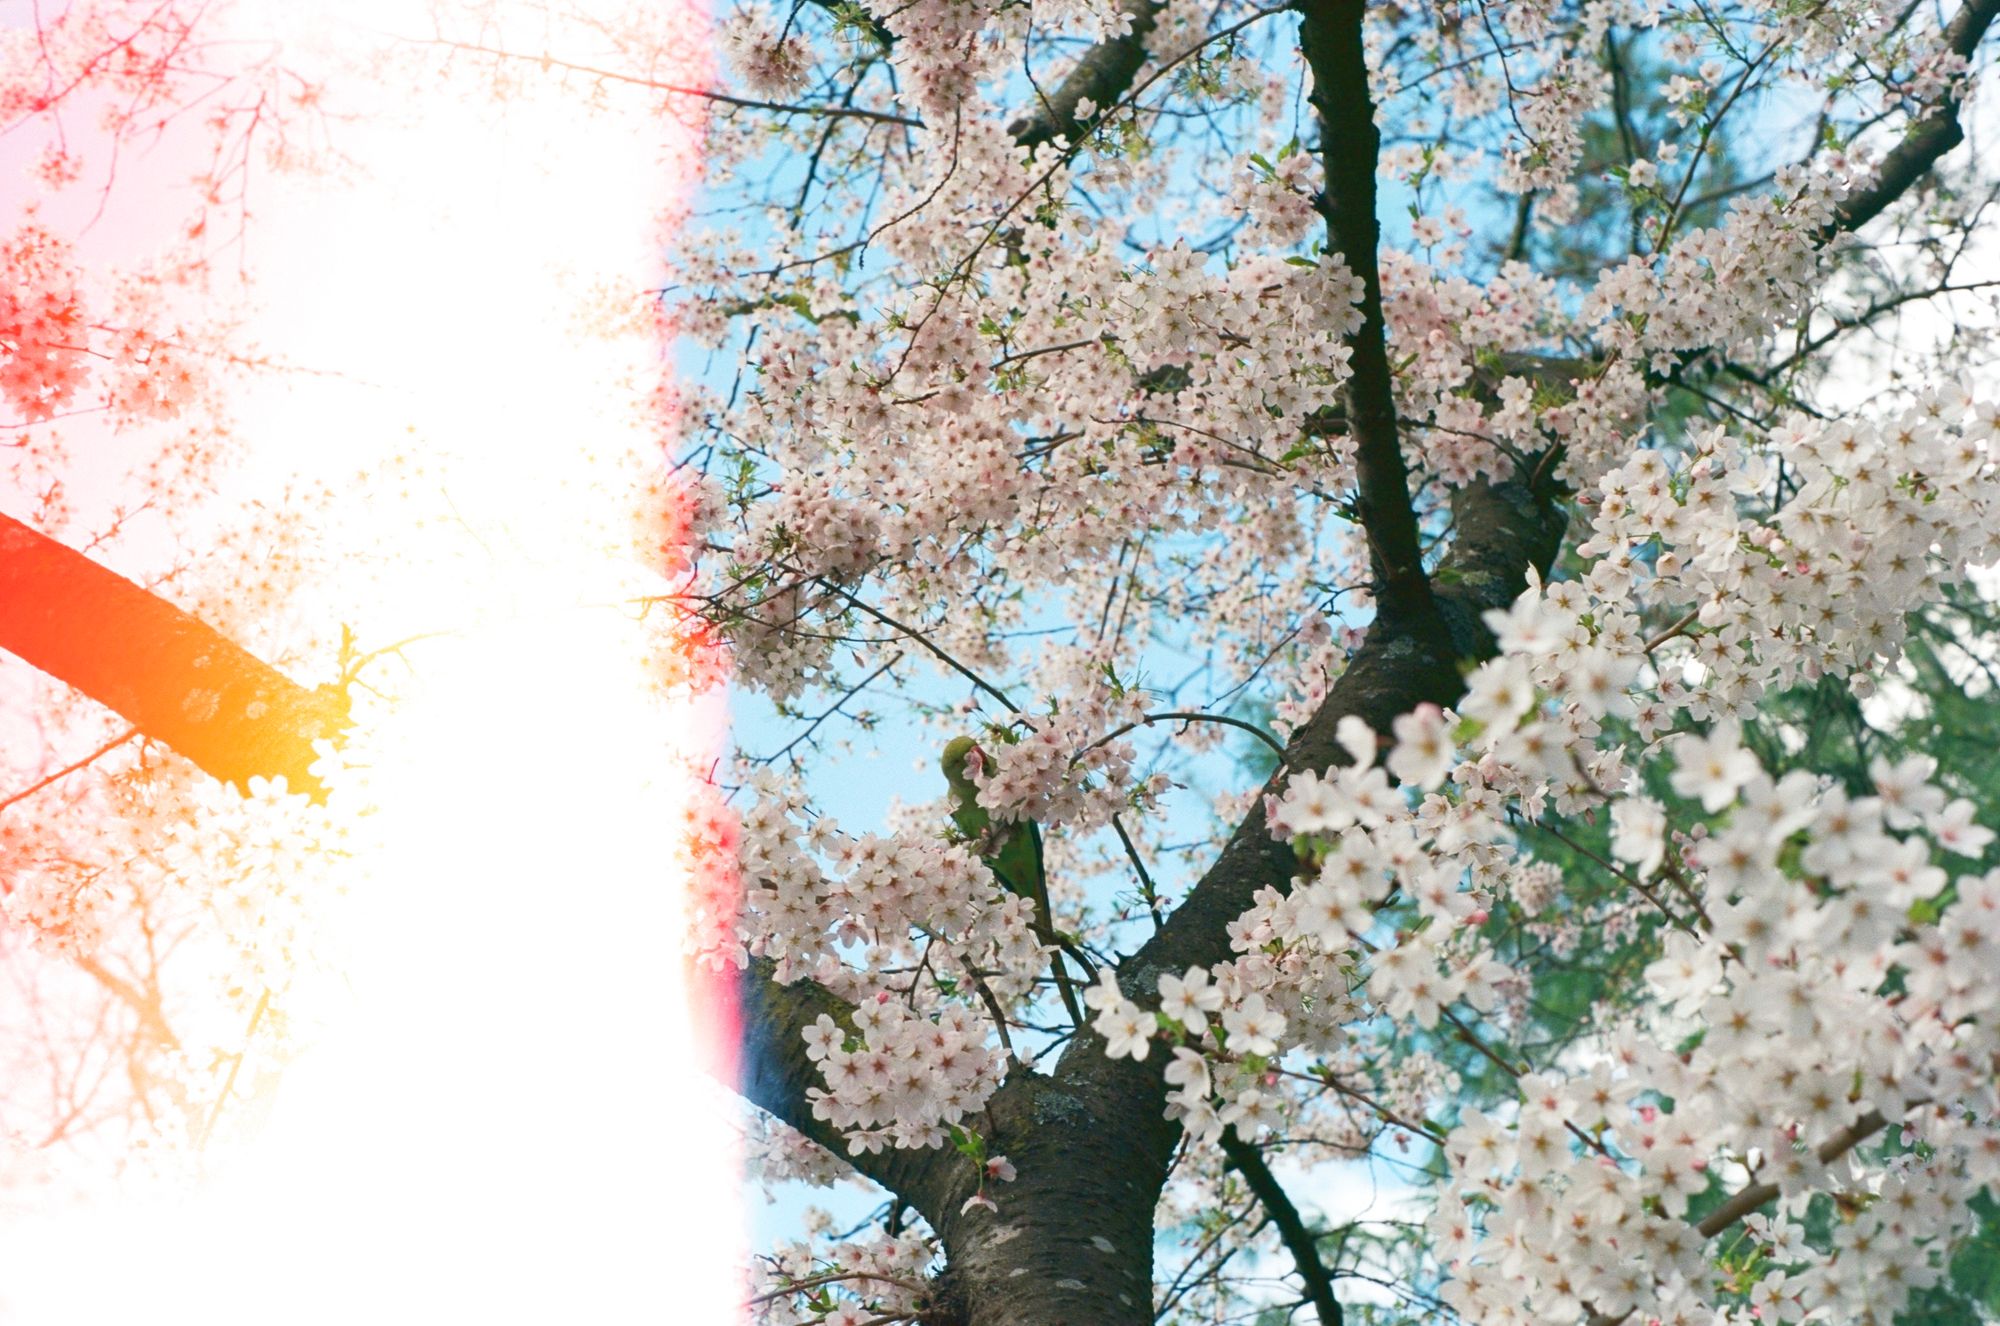 At the juncture of two branches from a tree trunk, a parakeet steals some white blossom with pink centres. A pink-orange light leak falls across the lefthand third of the image.